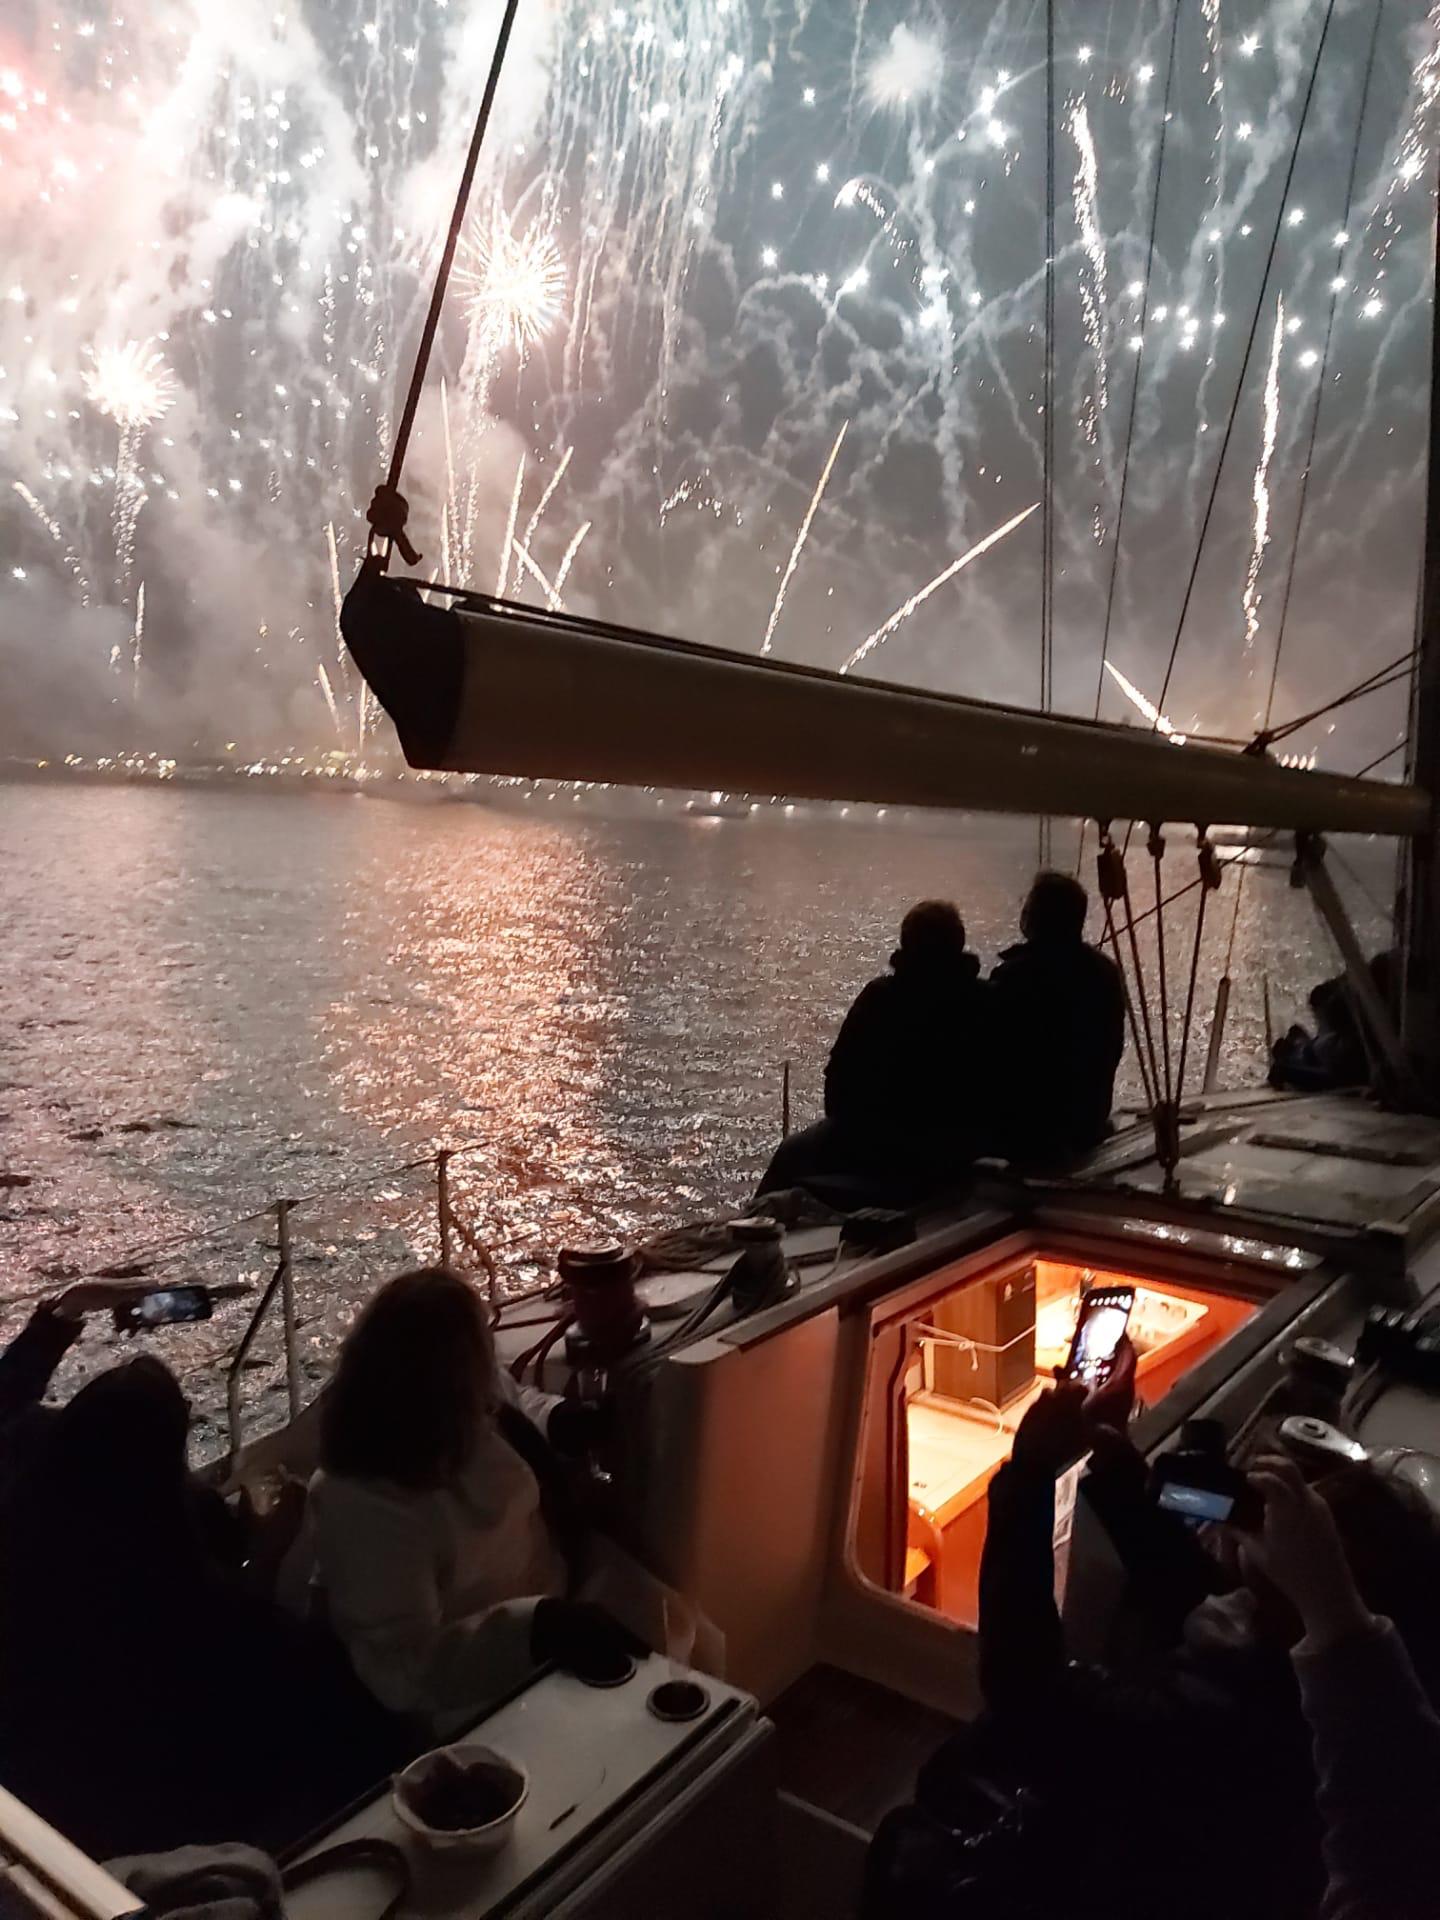 New Year's Eve on a boat